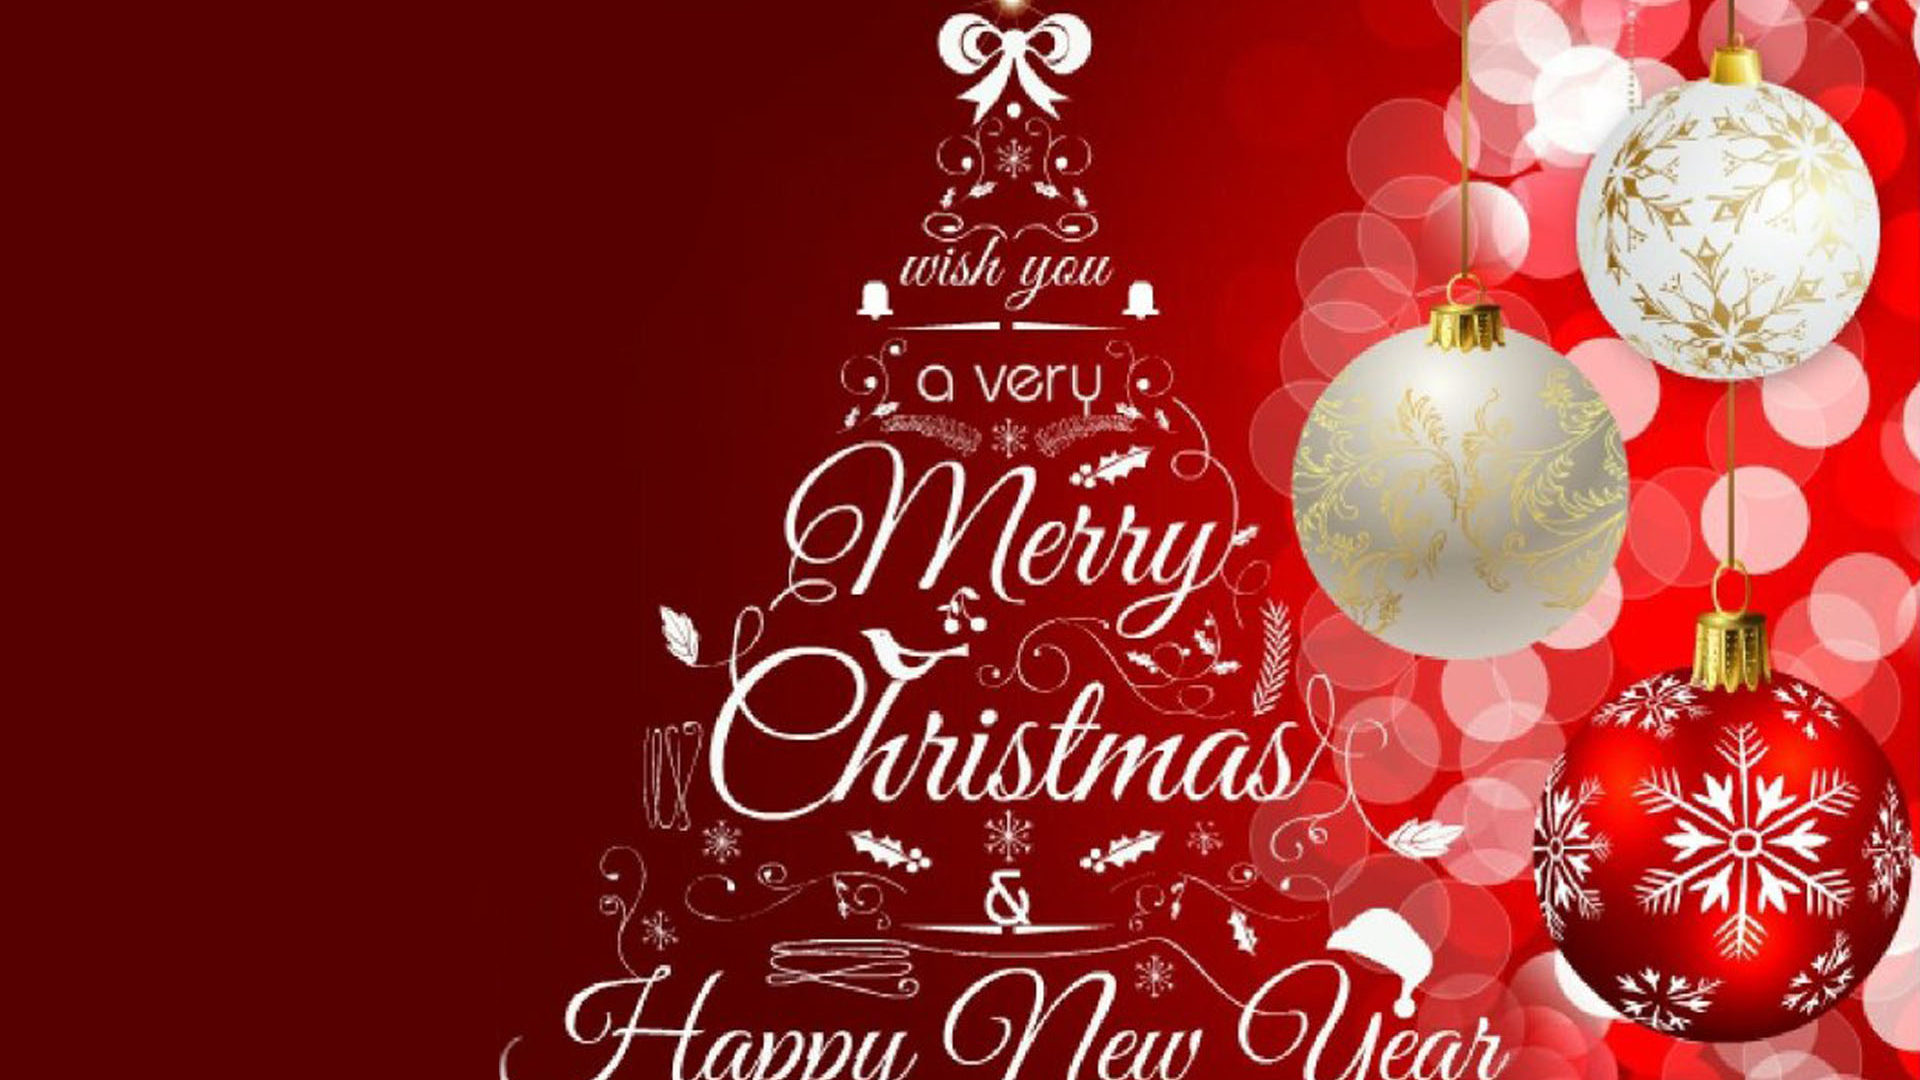 Greeting Card Merry Christmas And Happy New Year Image